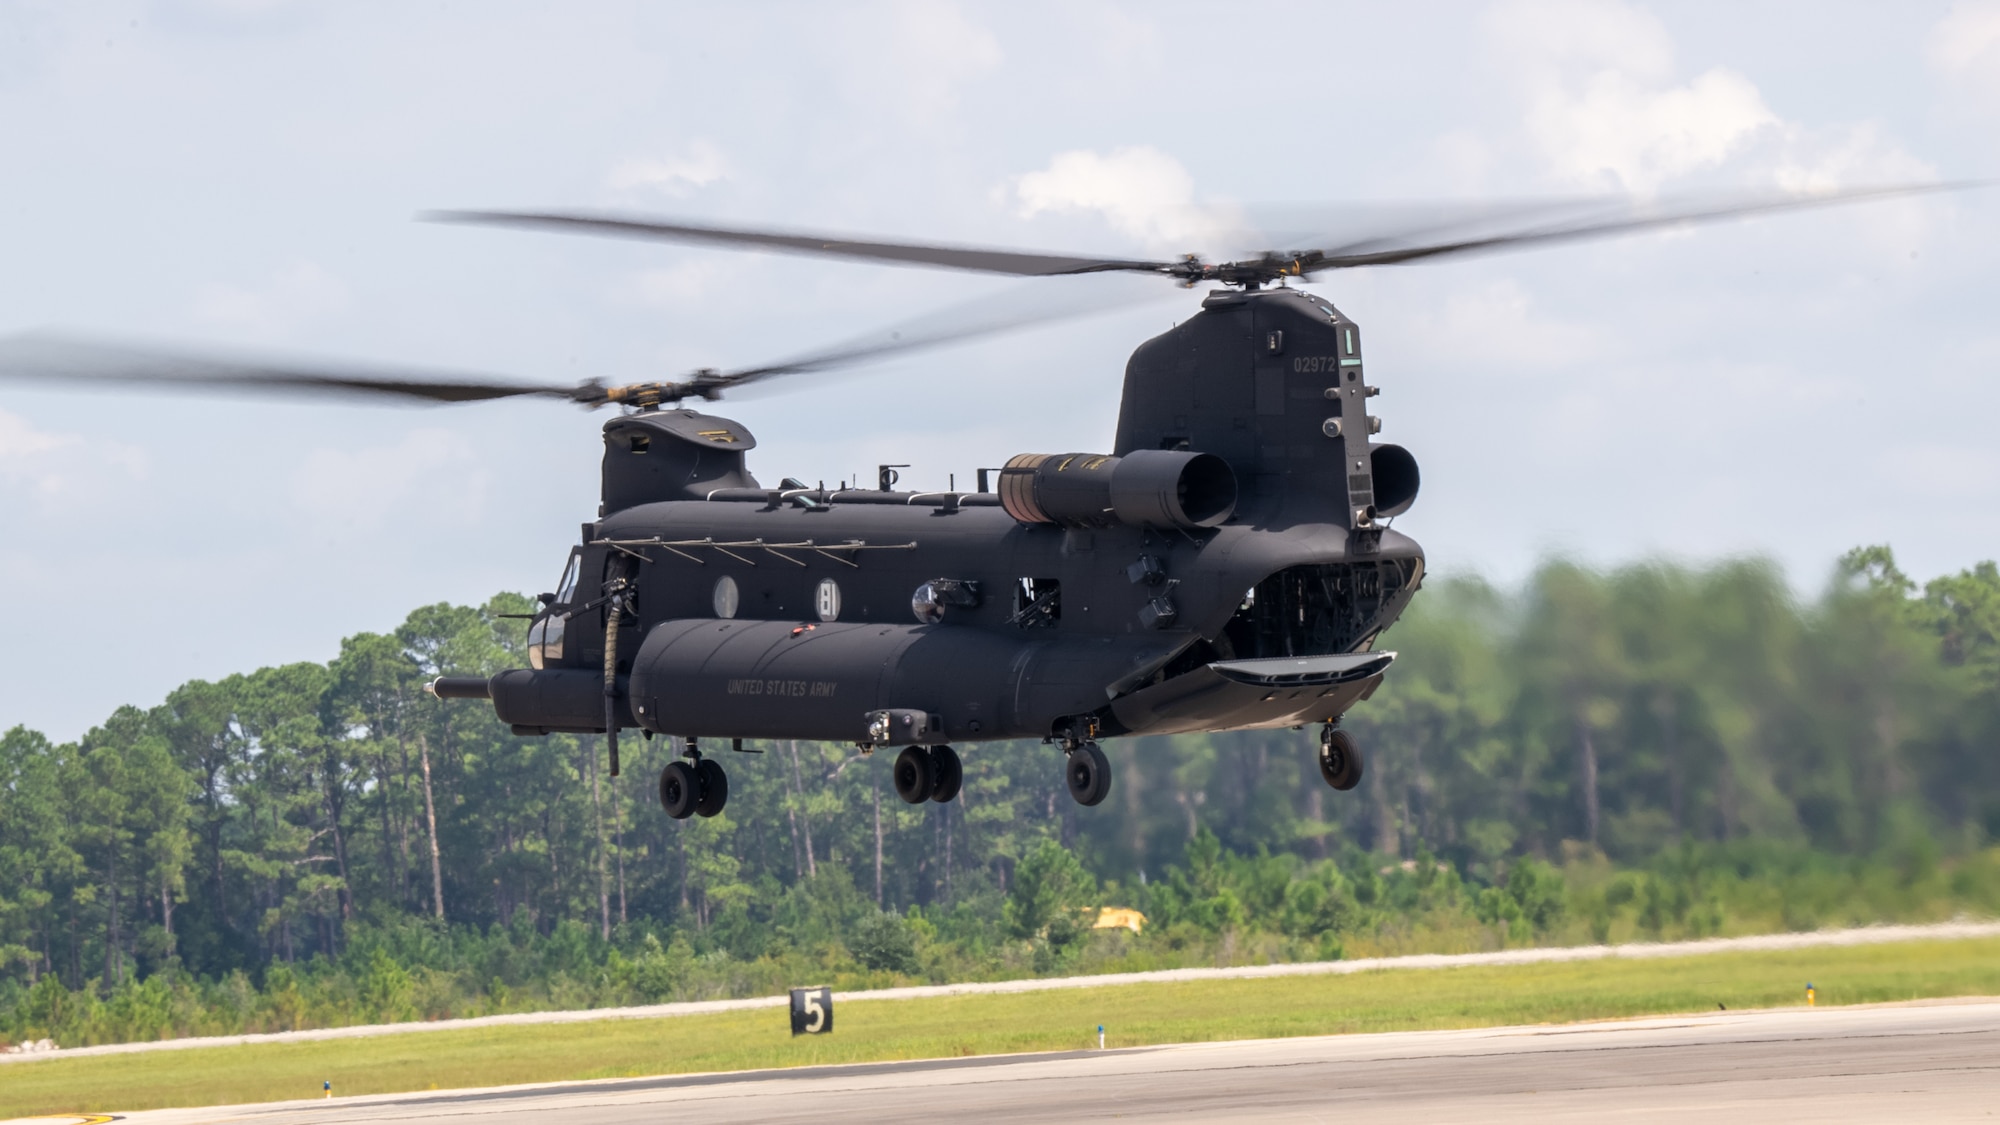 An MH-47G Chinook helicopter assigned to the 160th Special Operations Aviation Regiment takes off from the flight line during the 94th Joint Civilian Orientation Conference at Hurlburt Field, Florida, Sept. 21, 2023. JCOC is the Department of Defense’s public liaison program, designed to provide American business and community leaders with a deeper understanding of the military by showcasing the rewards and challenges service members face both on and off the battlefield.